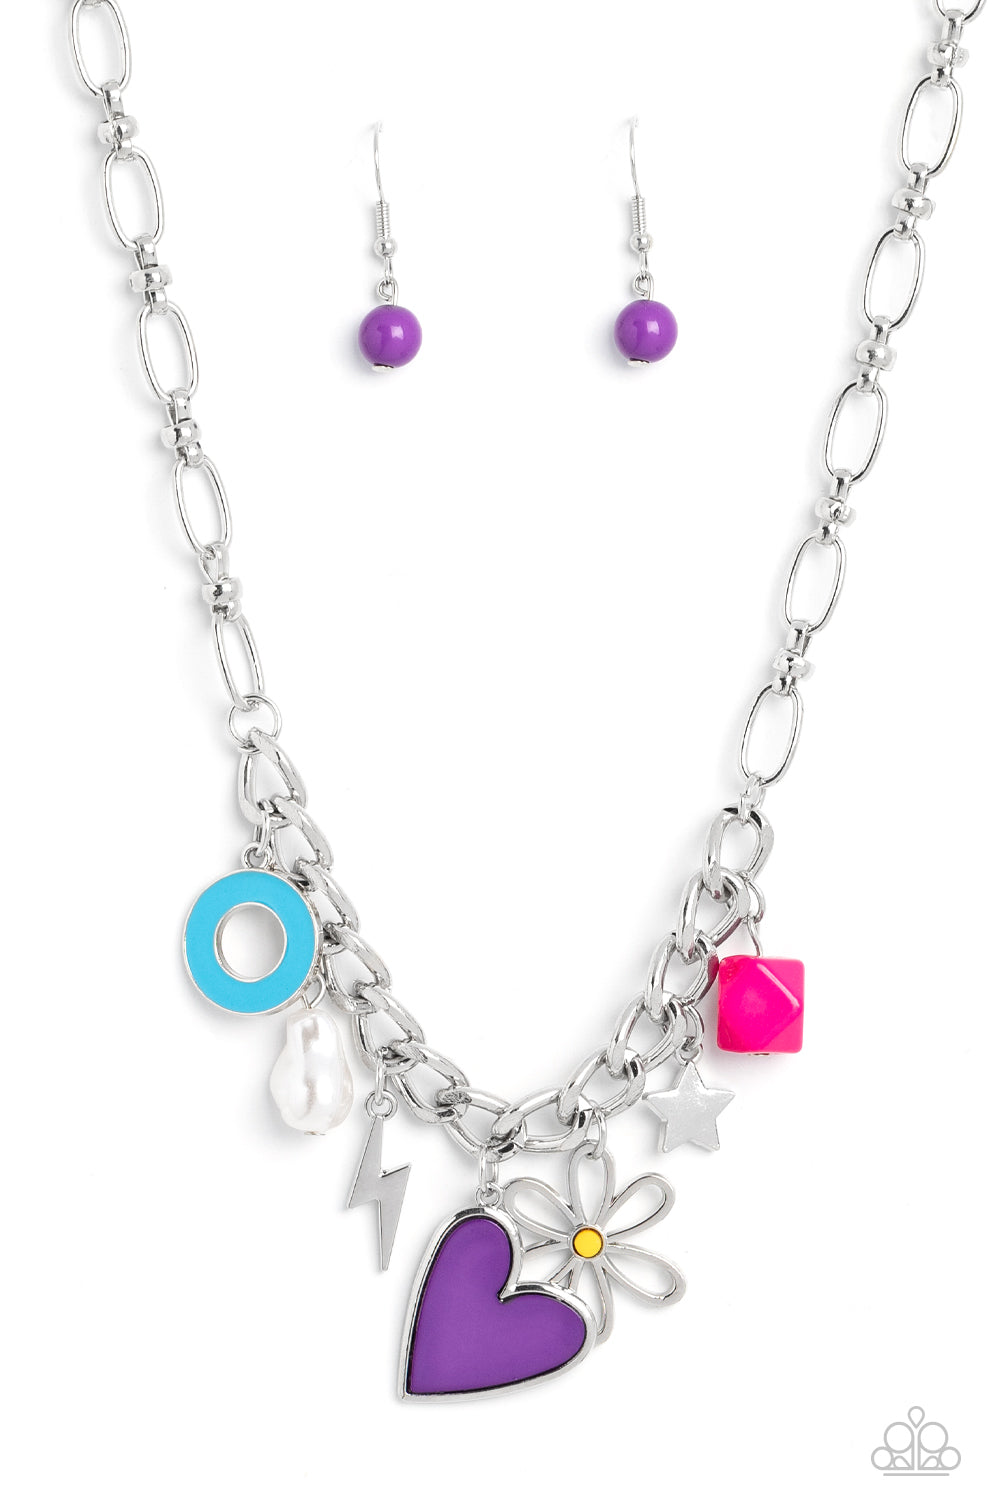 Elongated silver chain links, separated by tiny silver beads, lead down the neckline to a section of thick, flat, silver curb chain. A collection of whimsical charms gather along the thicker chain, including a lightning bolt, a star, a blue ring, a silhouette of a flower, a vibrant pink bead, a purple heart, and a polished white baroque pearl. 